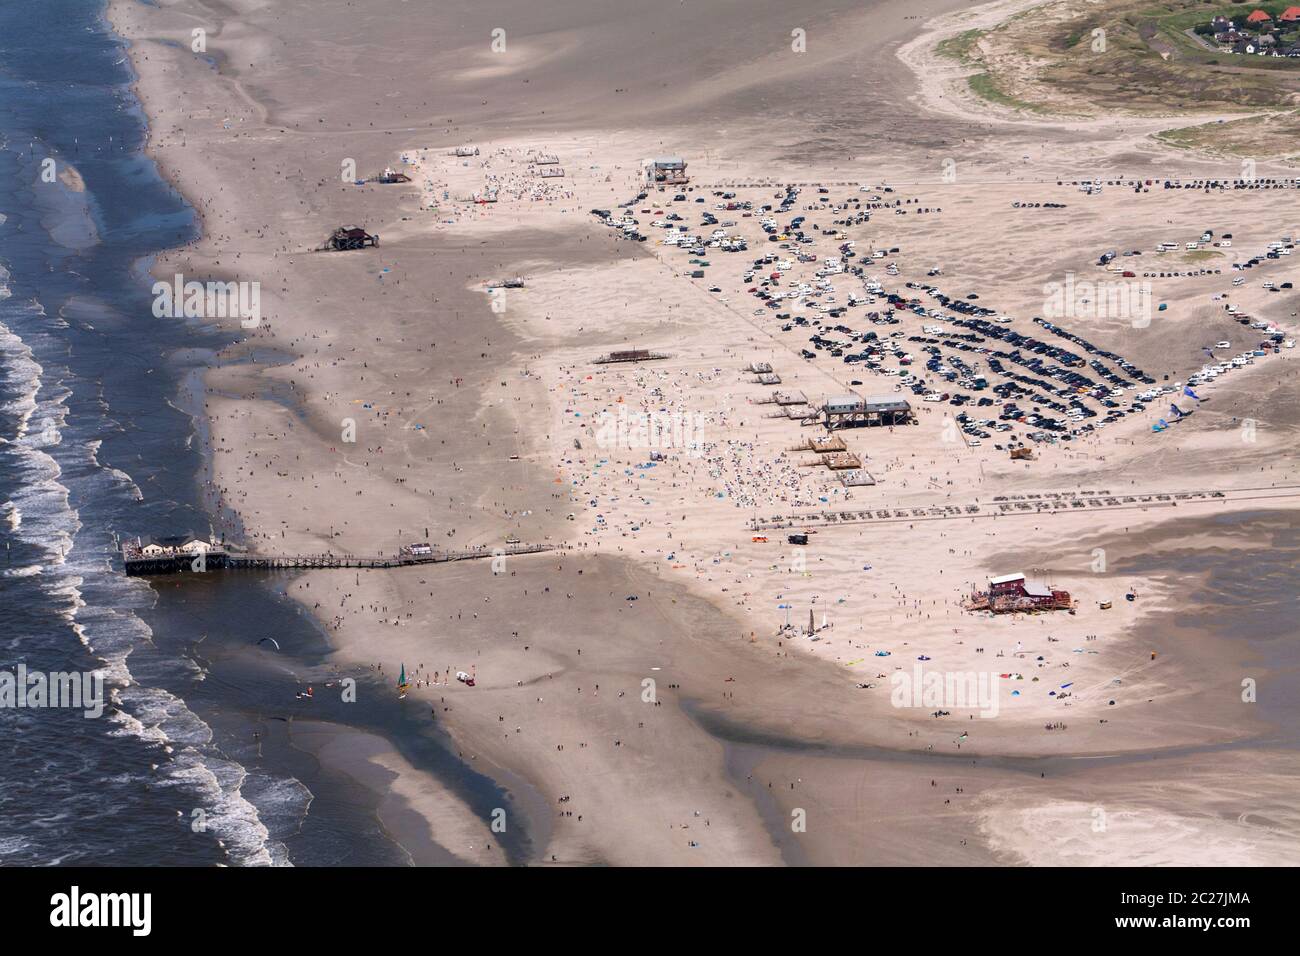 St. Peter-Ording, Aerial Photo of the Schleswig-Holstein Wadden Sea National Park in Germany Stock Photo